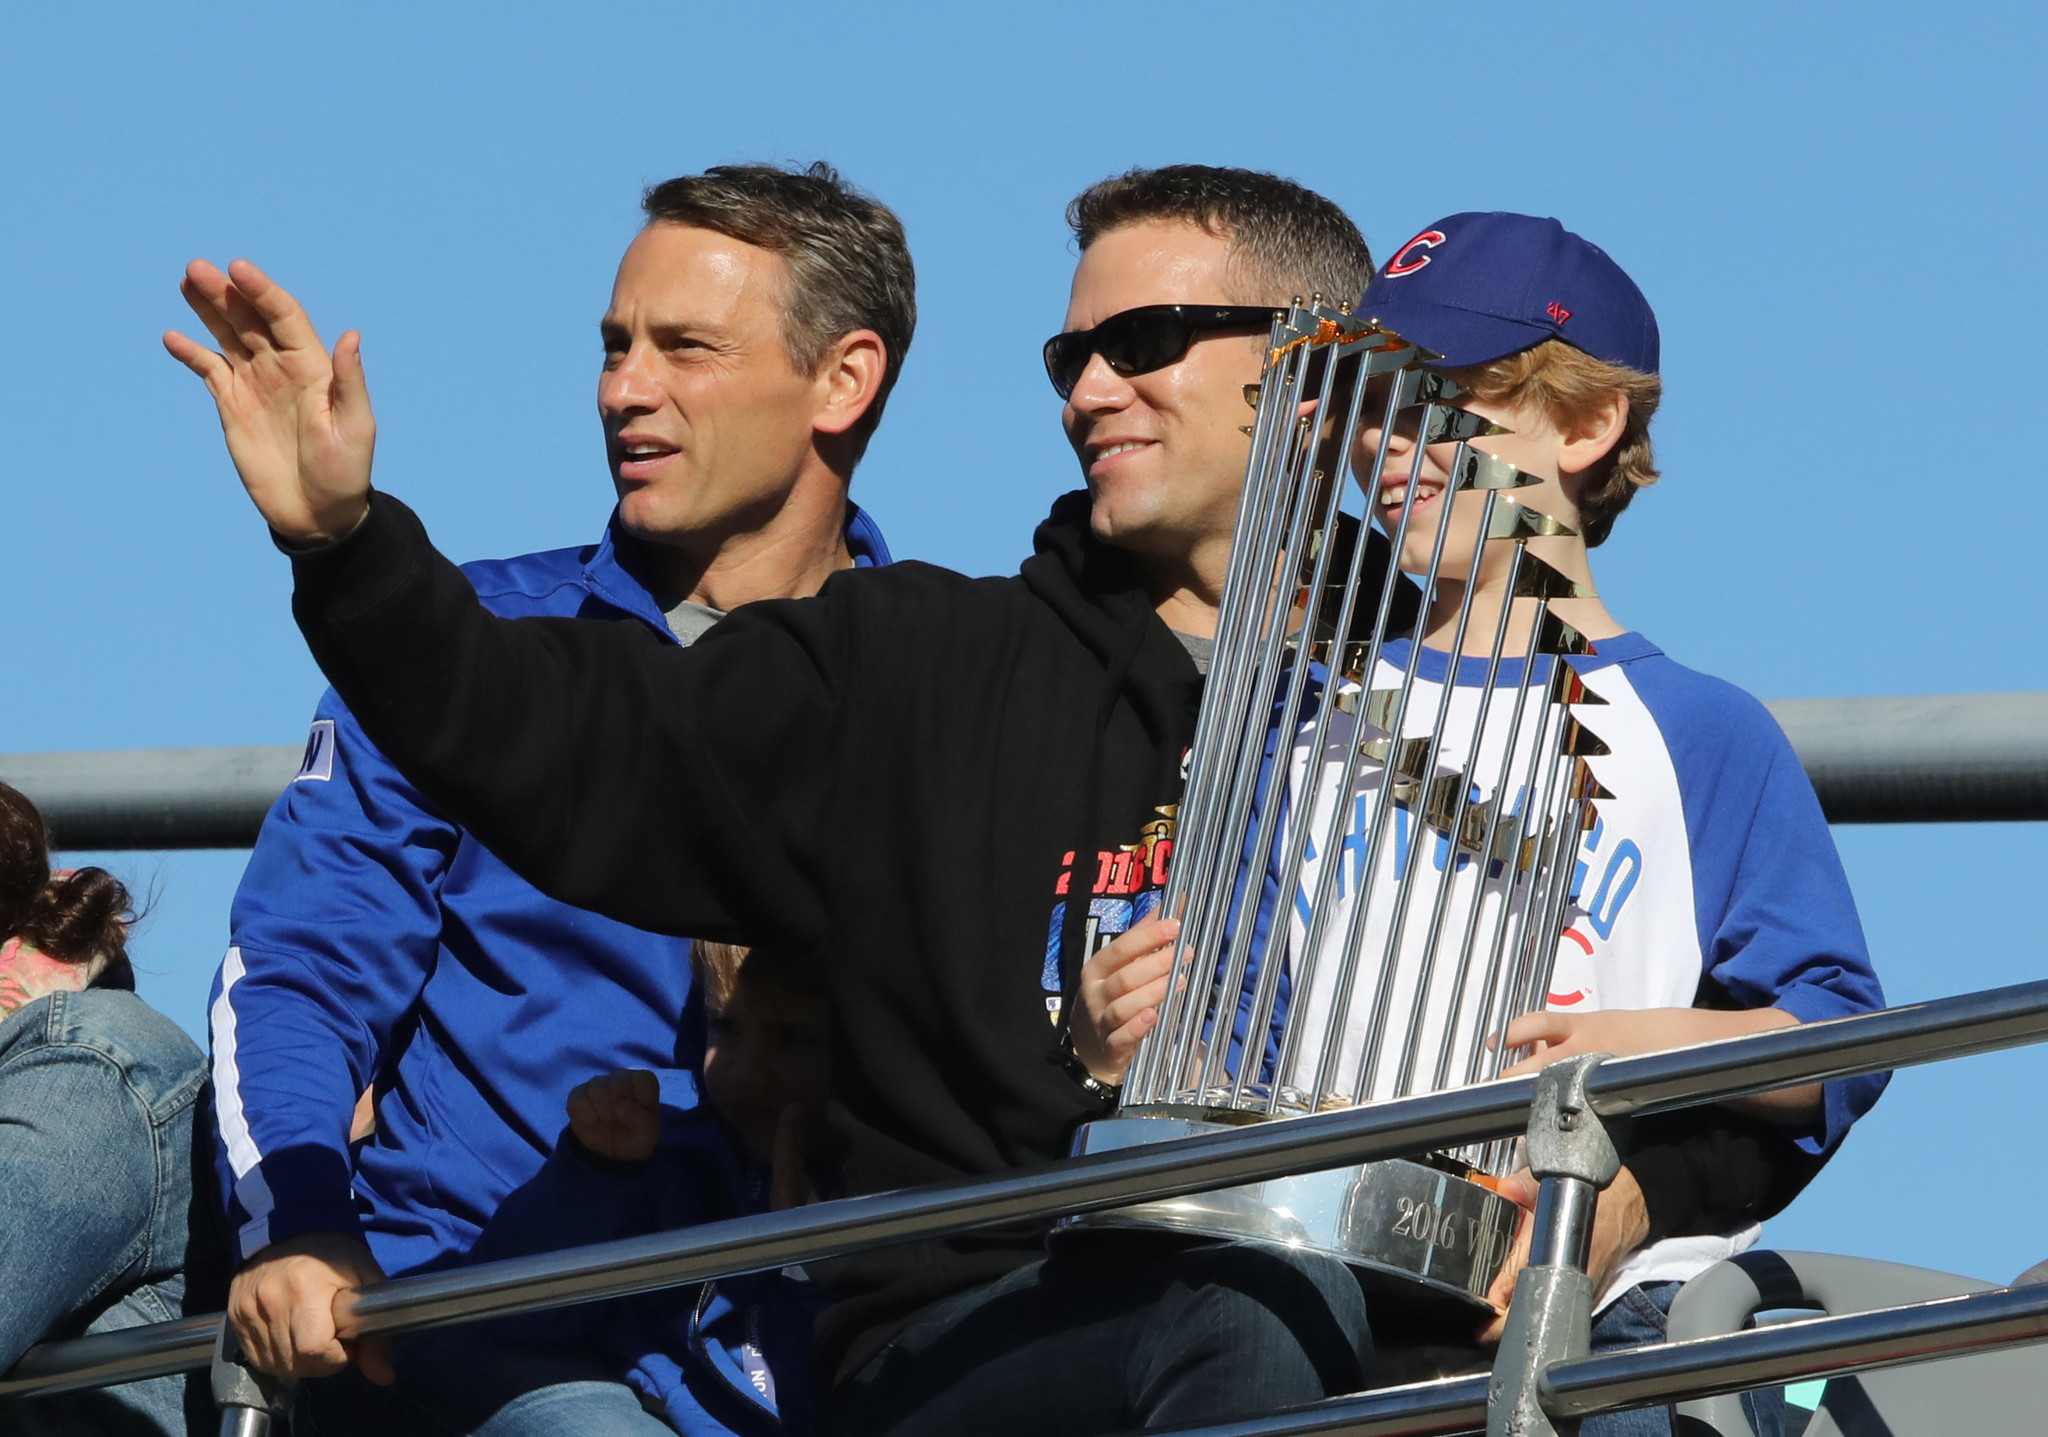 Chicago Cubs: Remembering key moments from 2016 World Series